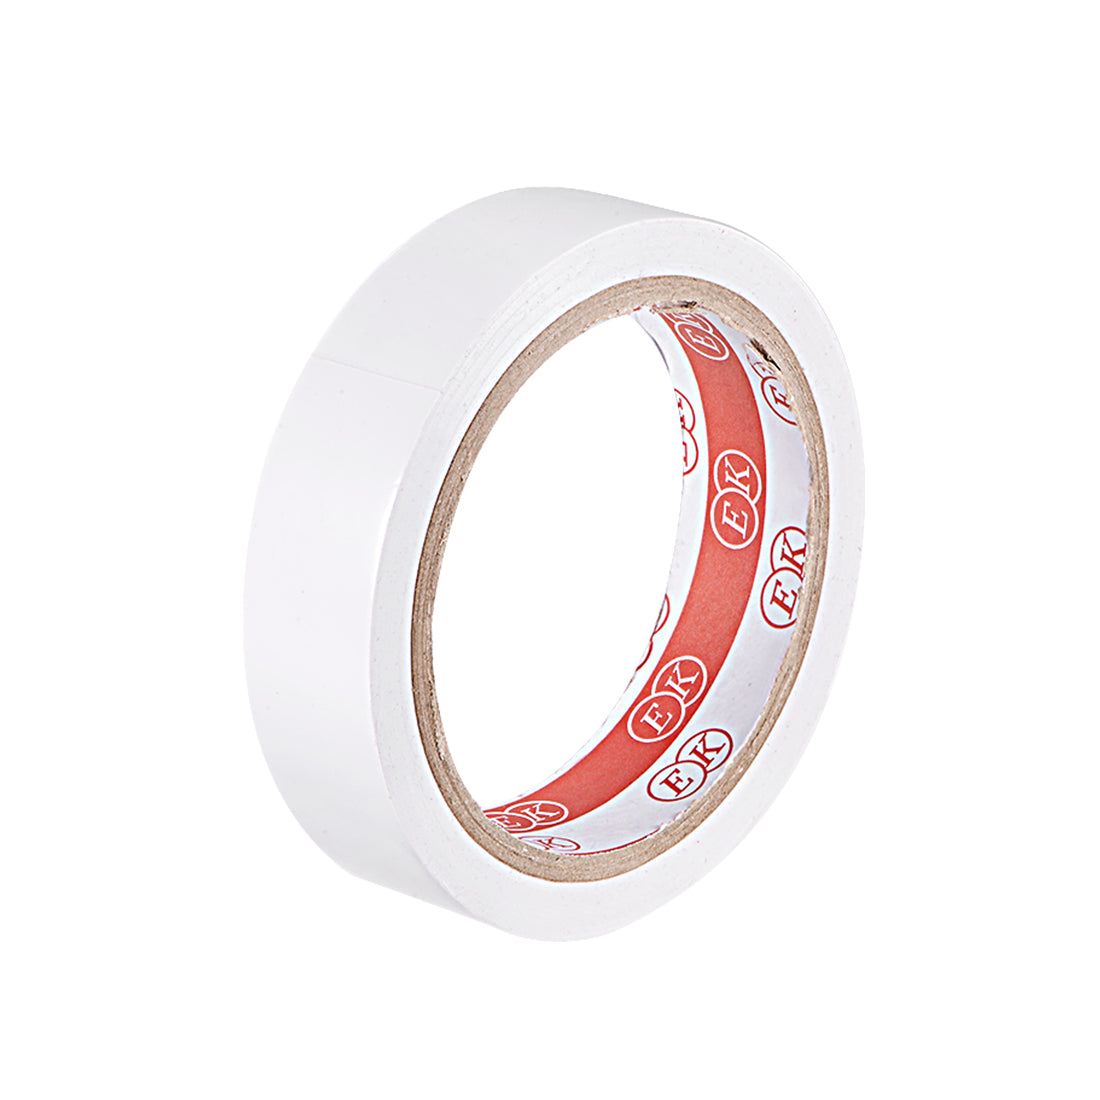 uxcell Uxcell Caution Warning Sticker Adhesive Tape PVC Marking Tape, 56 Ft x 1 Inch(LxW), White for Workplace Wet Floor